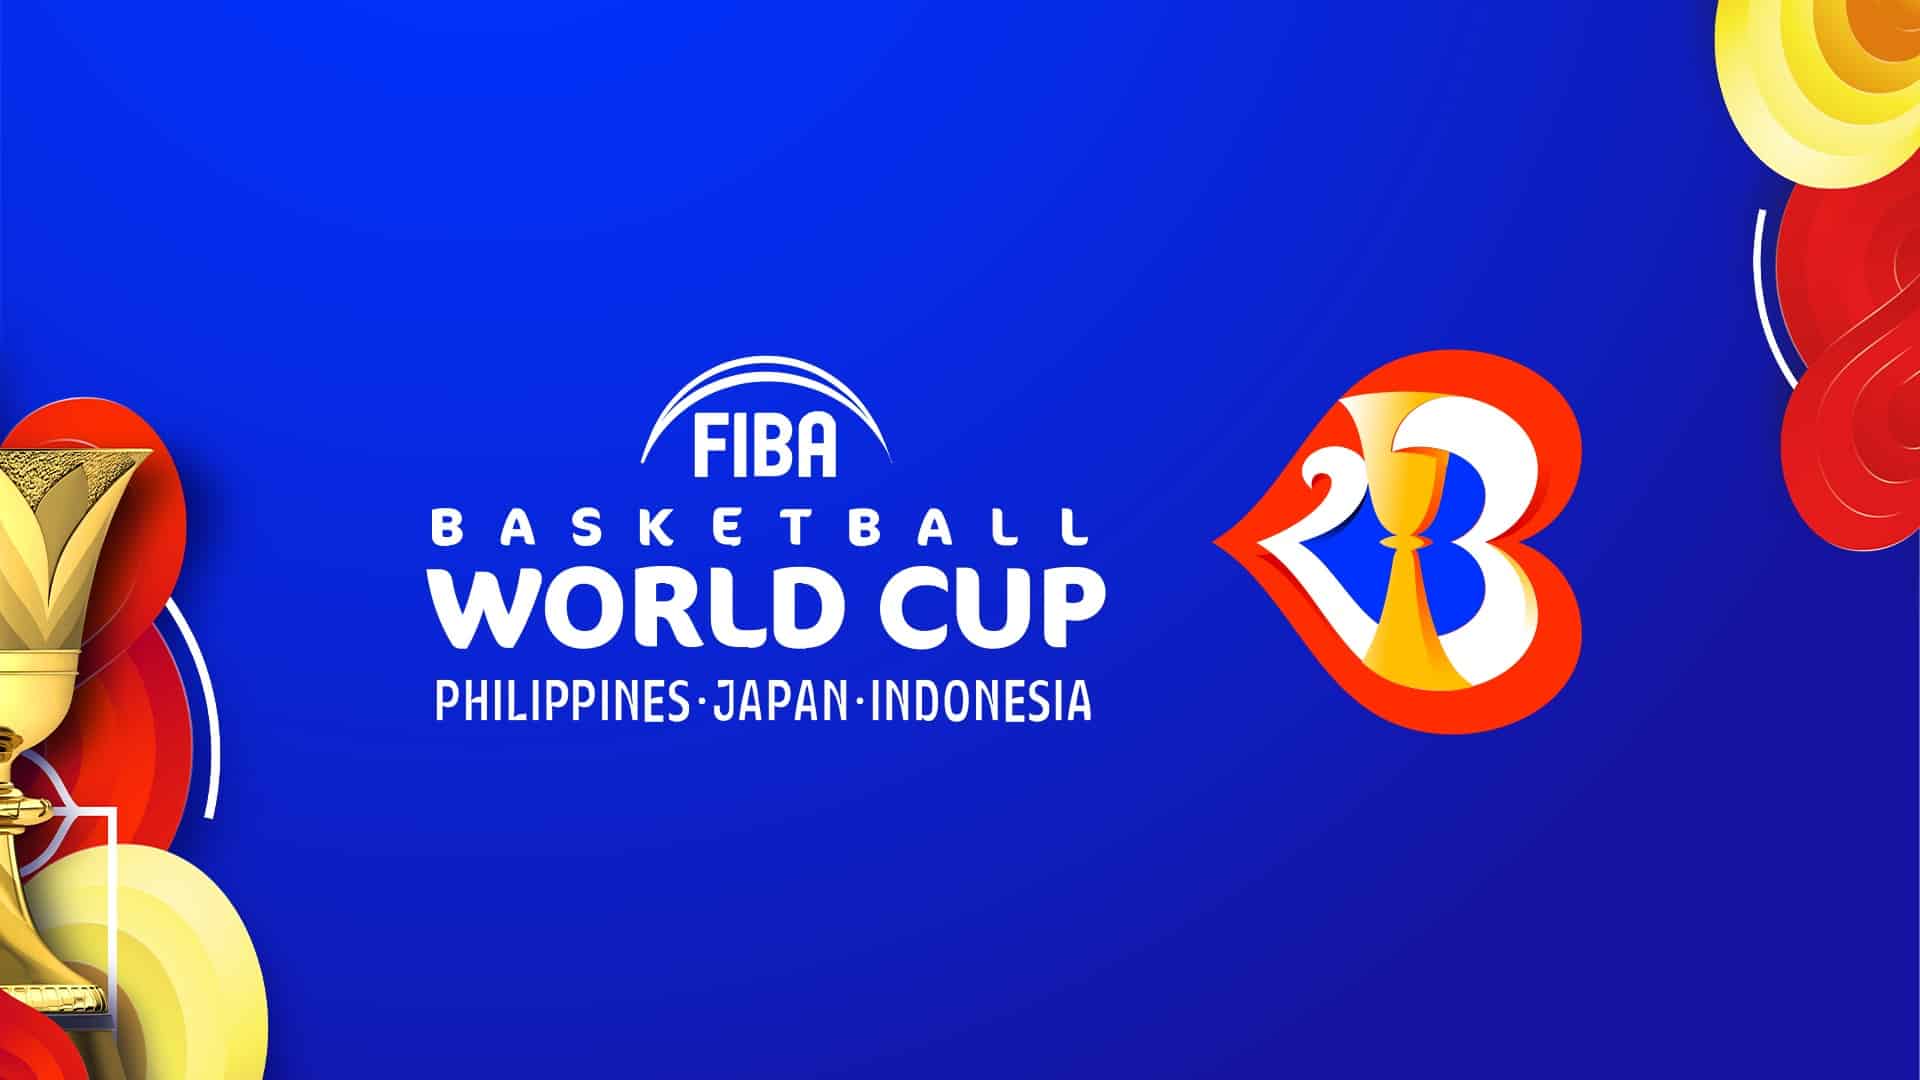 How to Watch the FIBA Basketball World Cup 2023 Without Cable